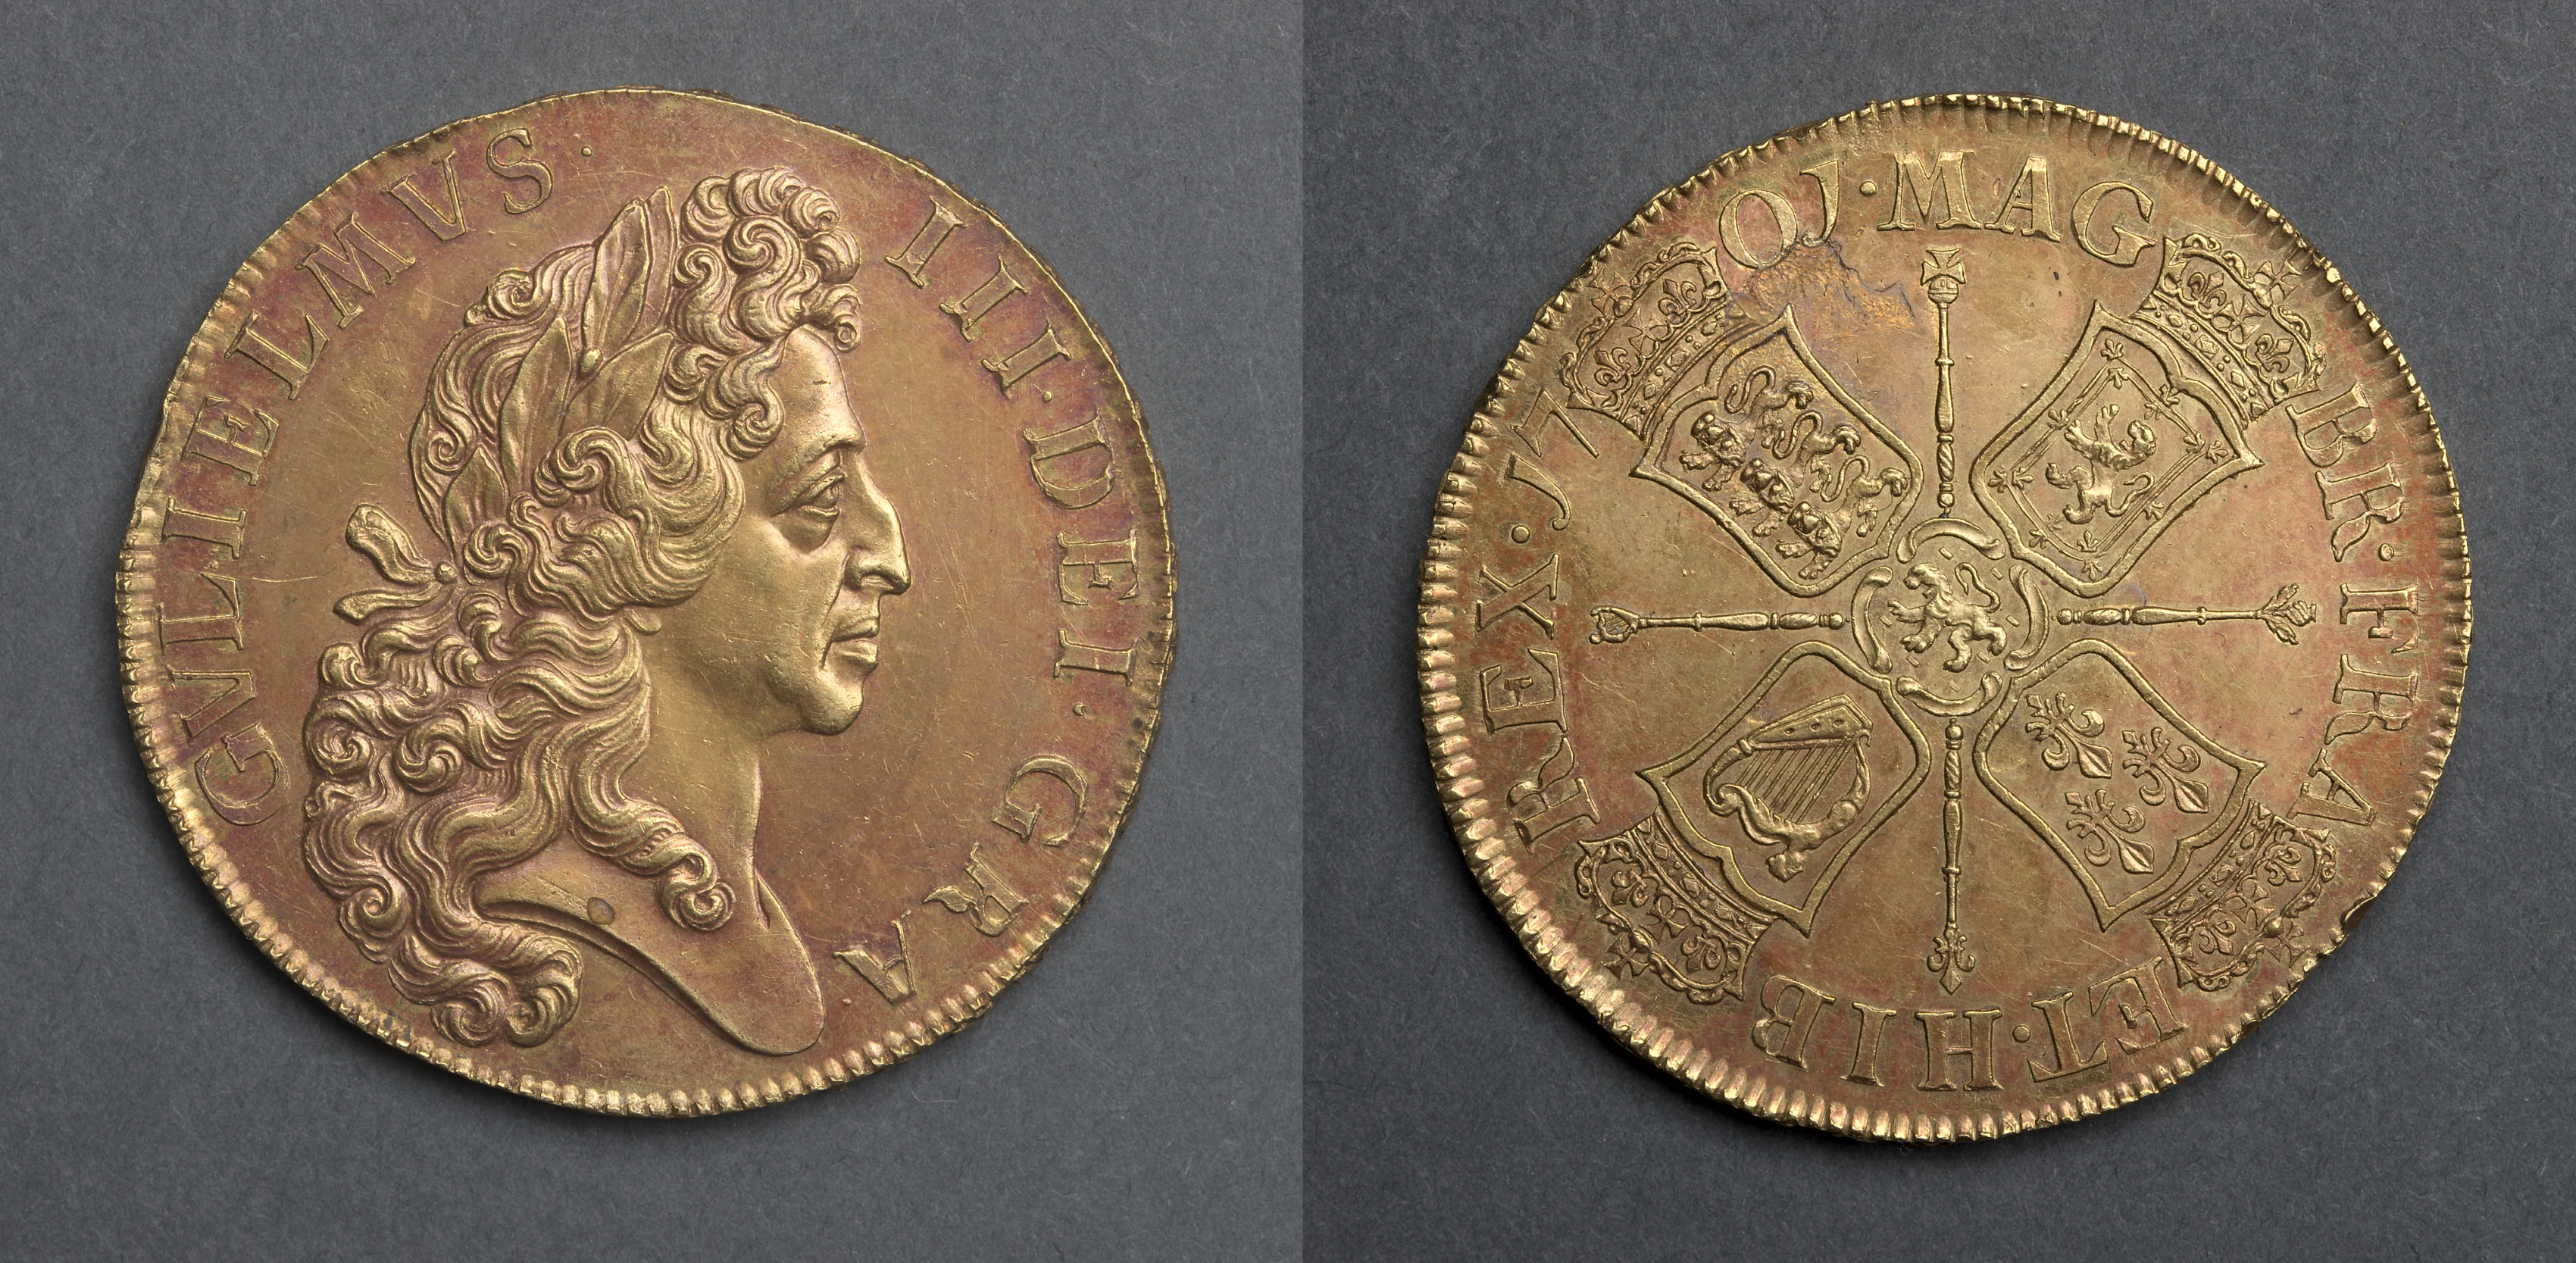 Five Guineas: William III (obverse); Four Shields and Lion of Nassau (reverse)